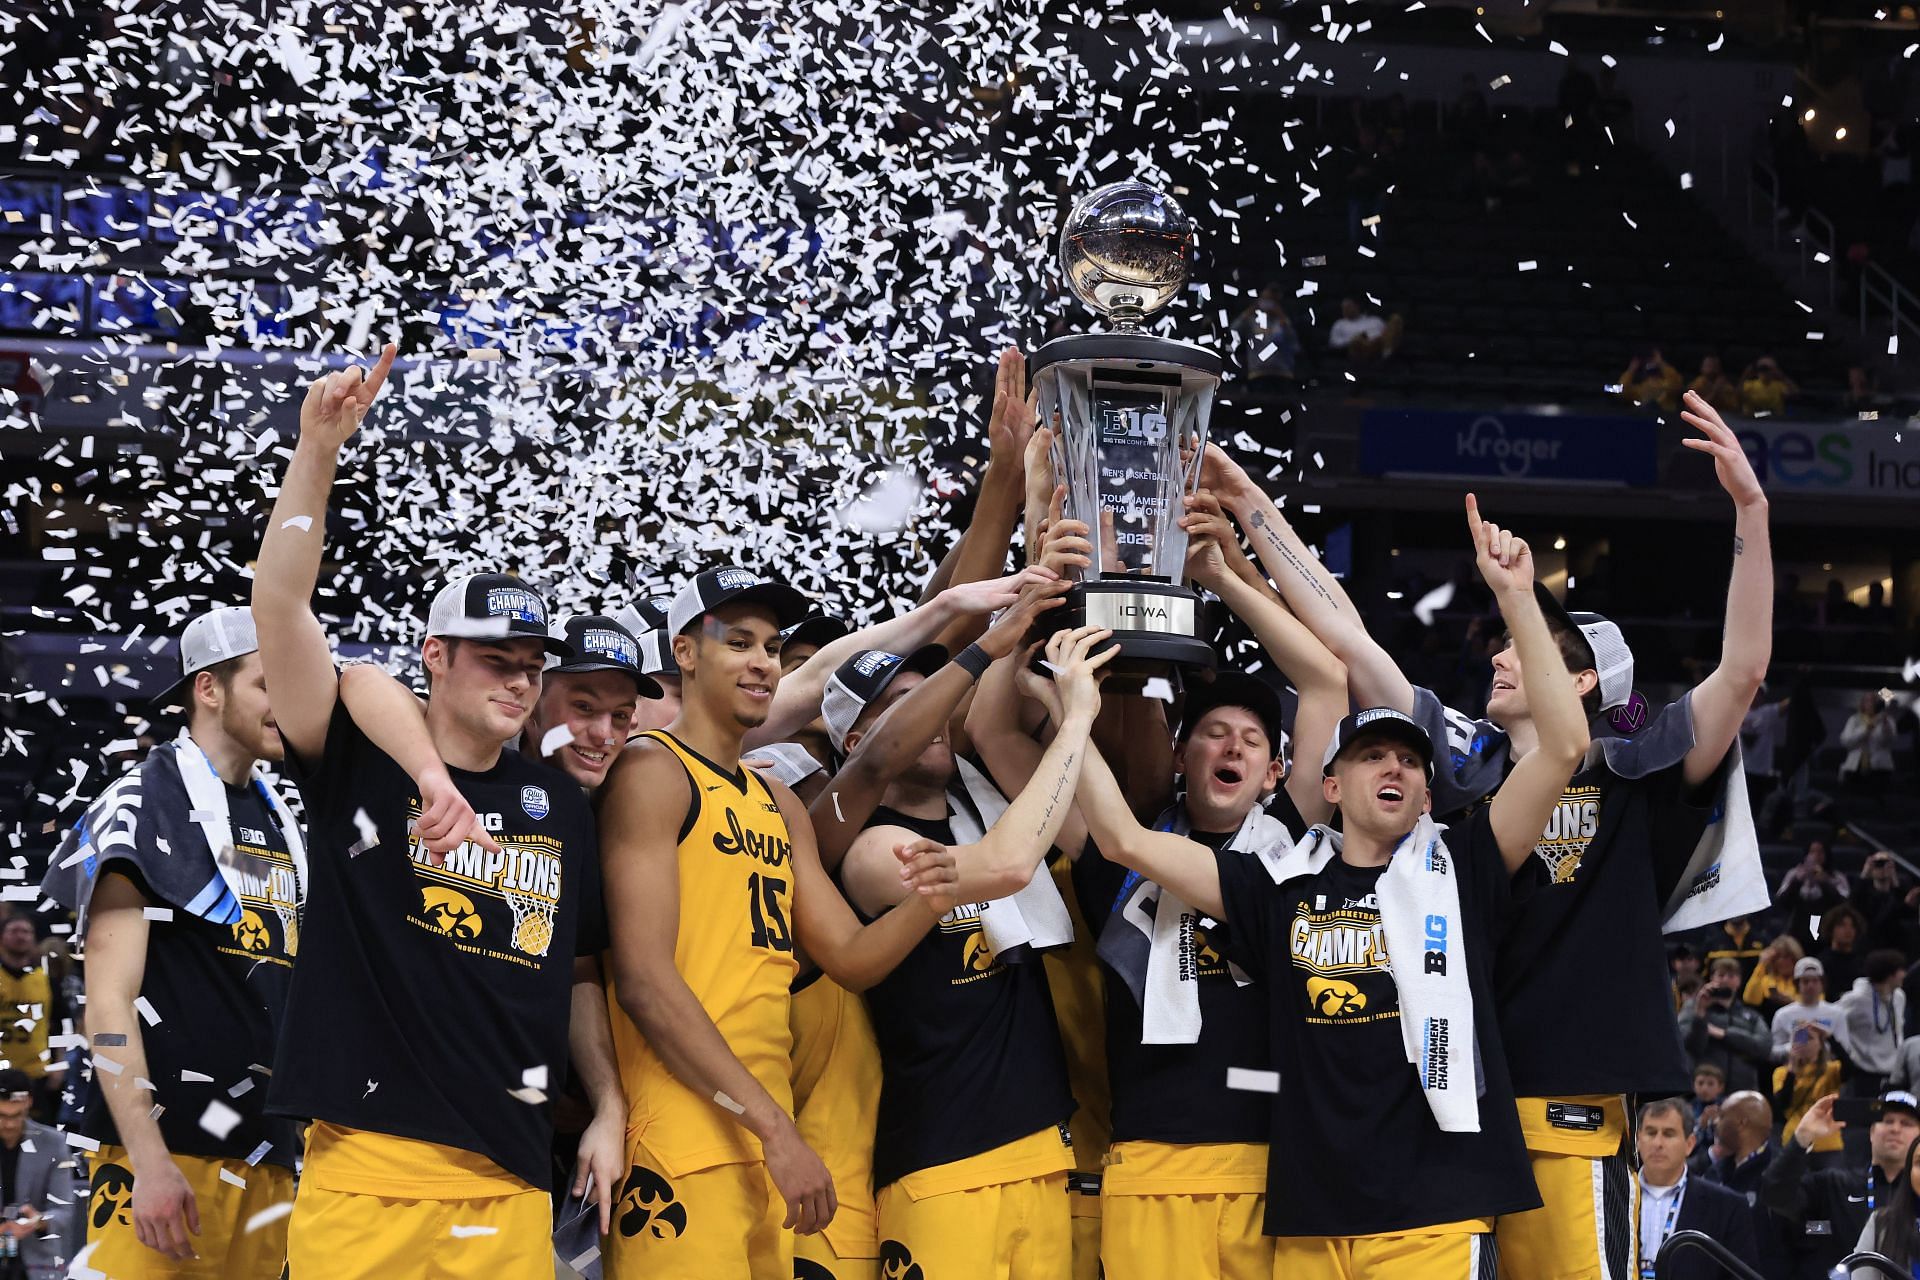 The Big Ten tournament champion Iowa Hawkeyes are a five-seed with championship hopes